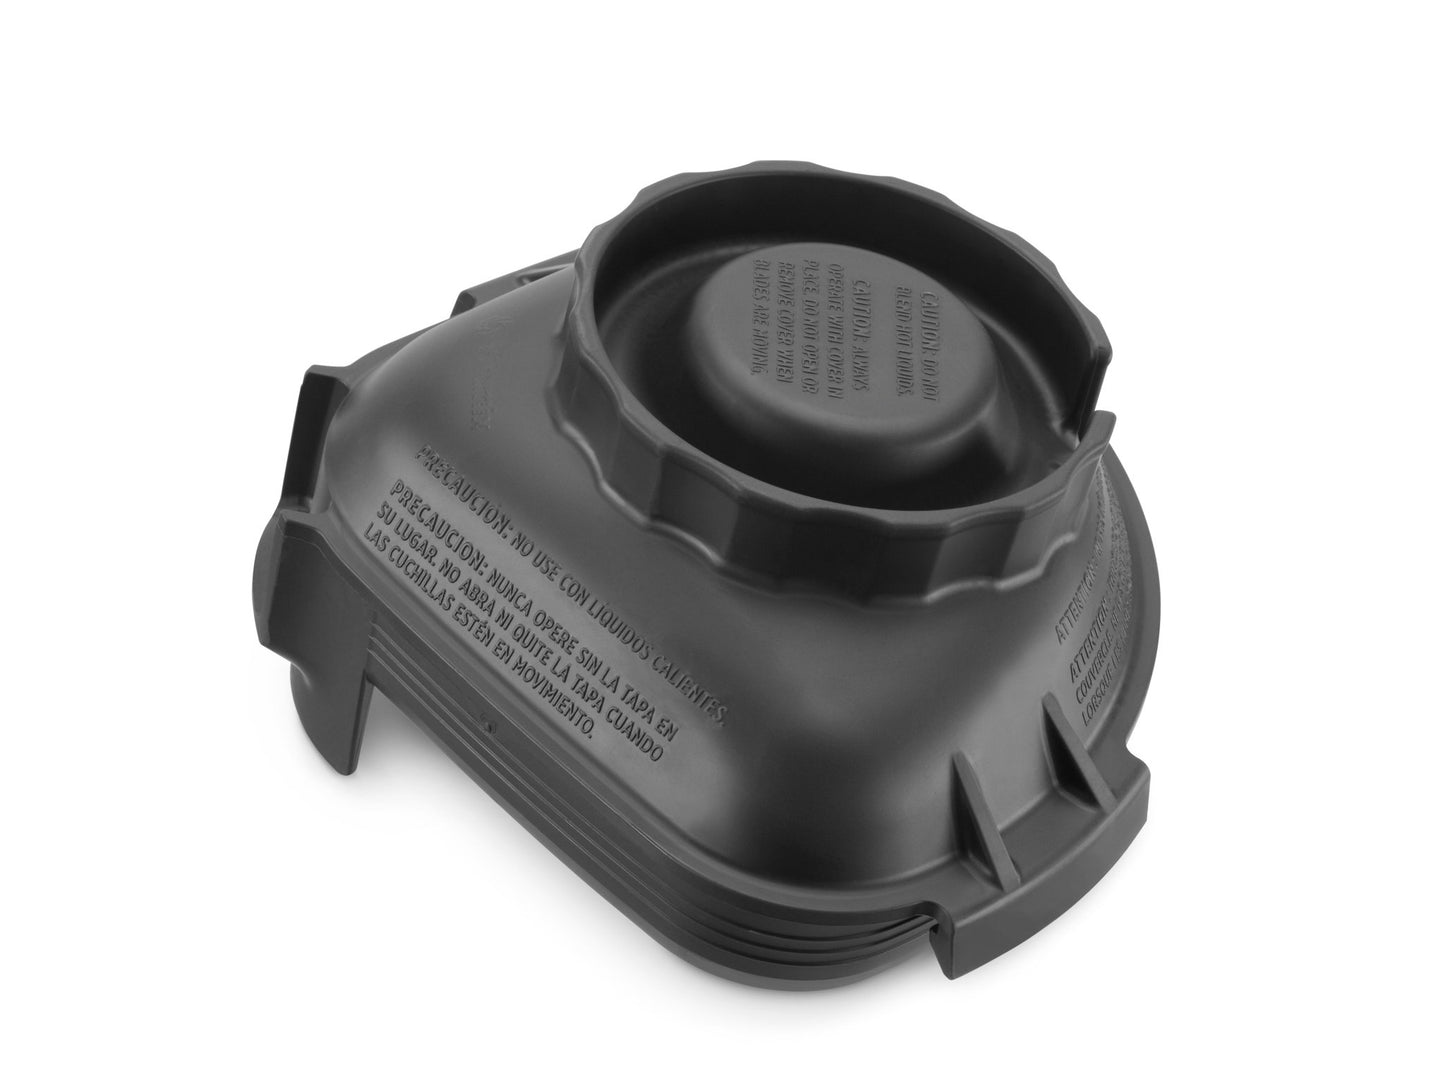 Vitamix Advance one piece lid only